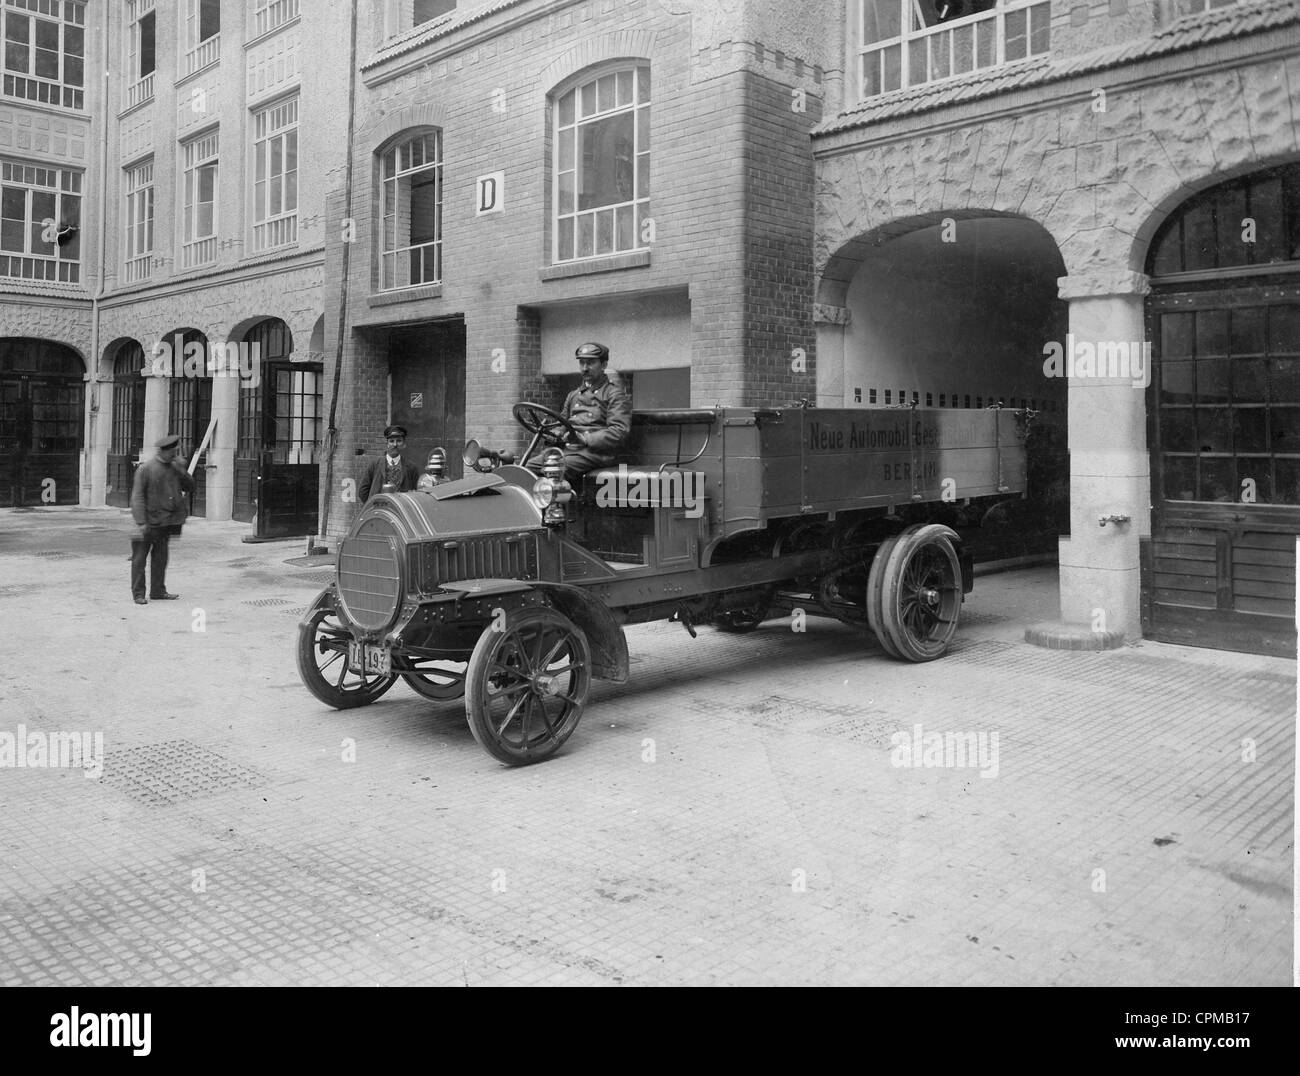 A truck of the Neue Automobil Gesellschaft in Berlin, 1907 Stock Photo